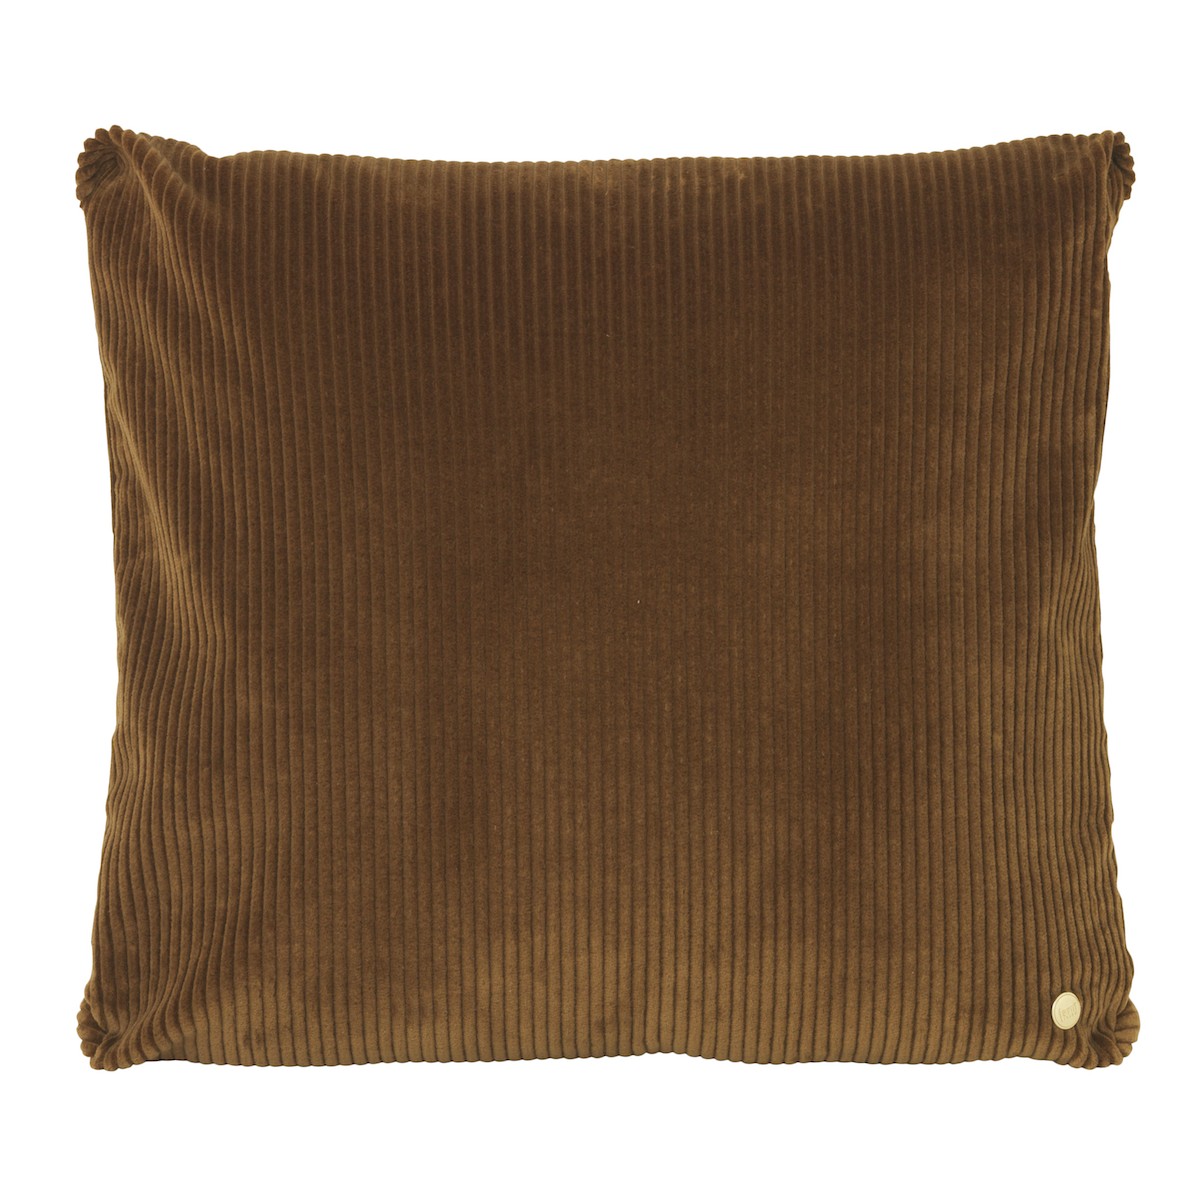 SOLD OUT 45x45cm – Corduroy cushion – Golden Olive